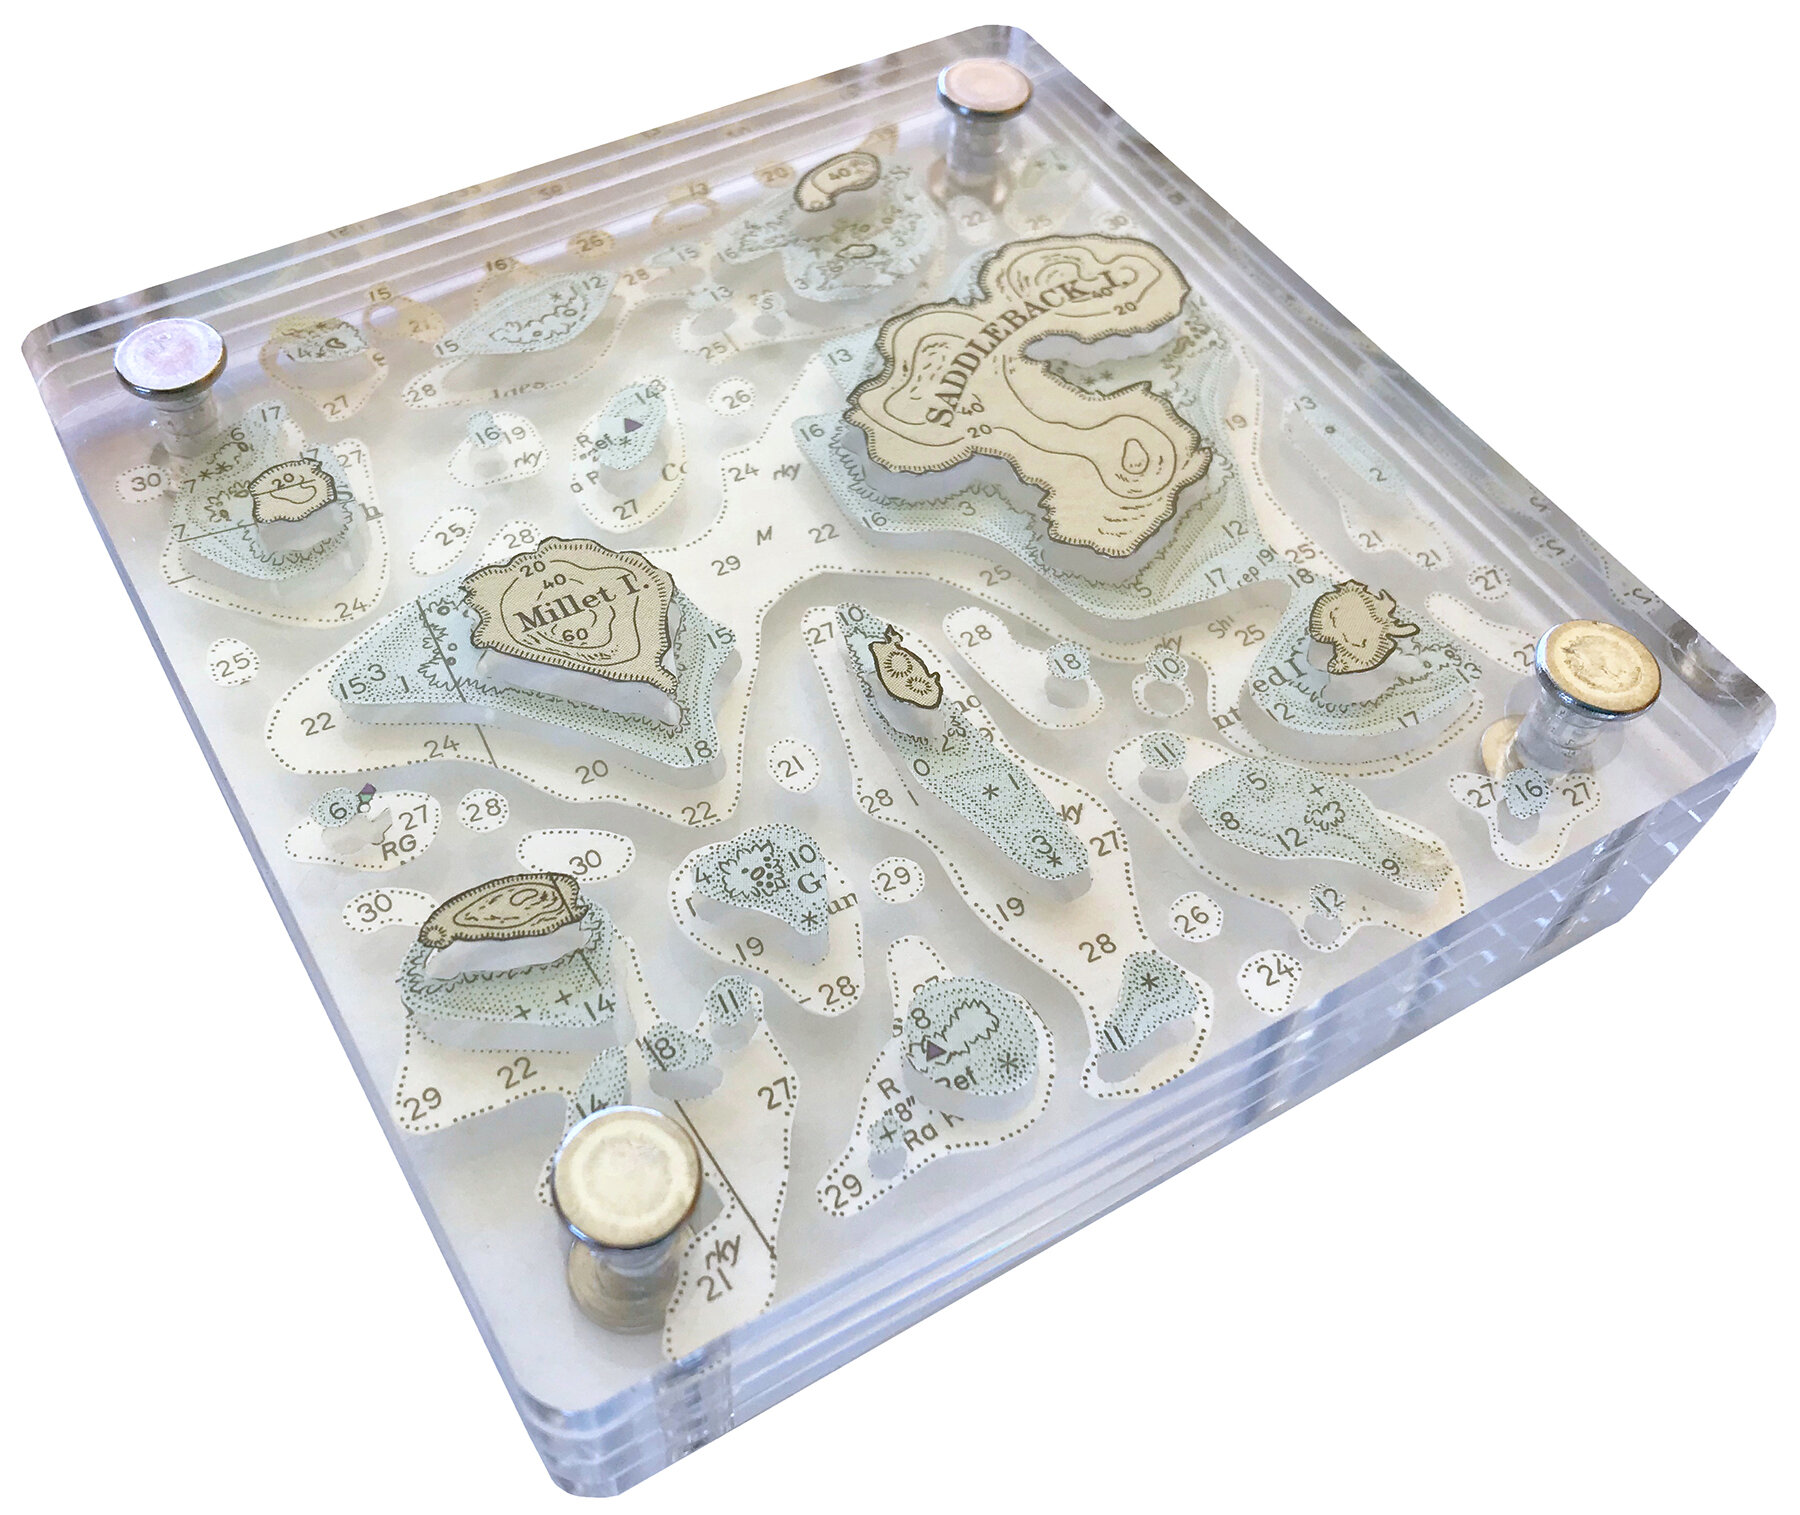   Floating;   excavated vintage nautical chart, acrylic, metal,  .75h x 4.5w x 4.5d inches 